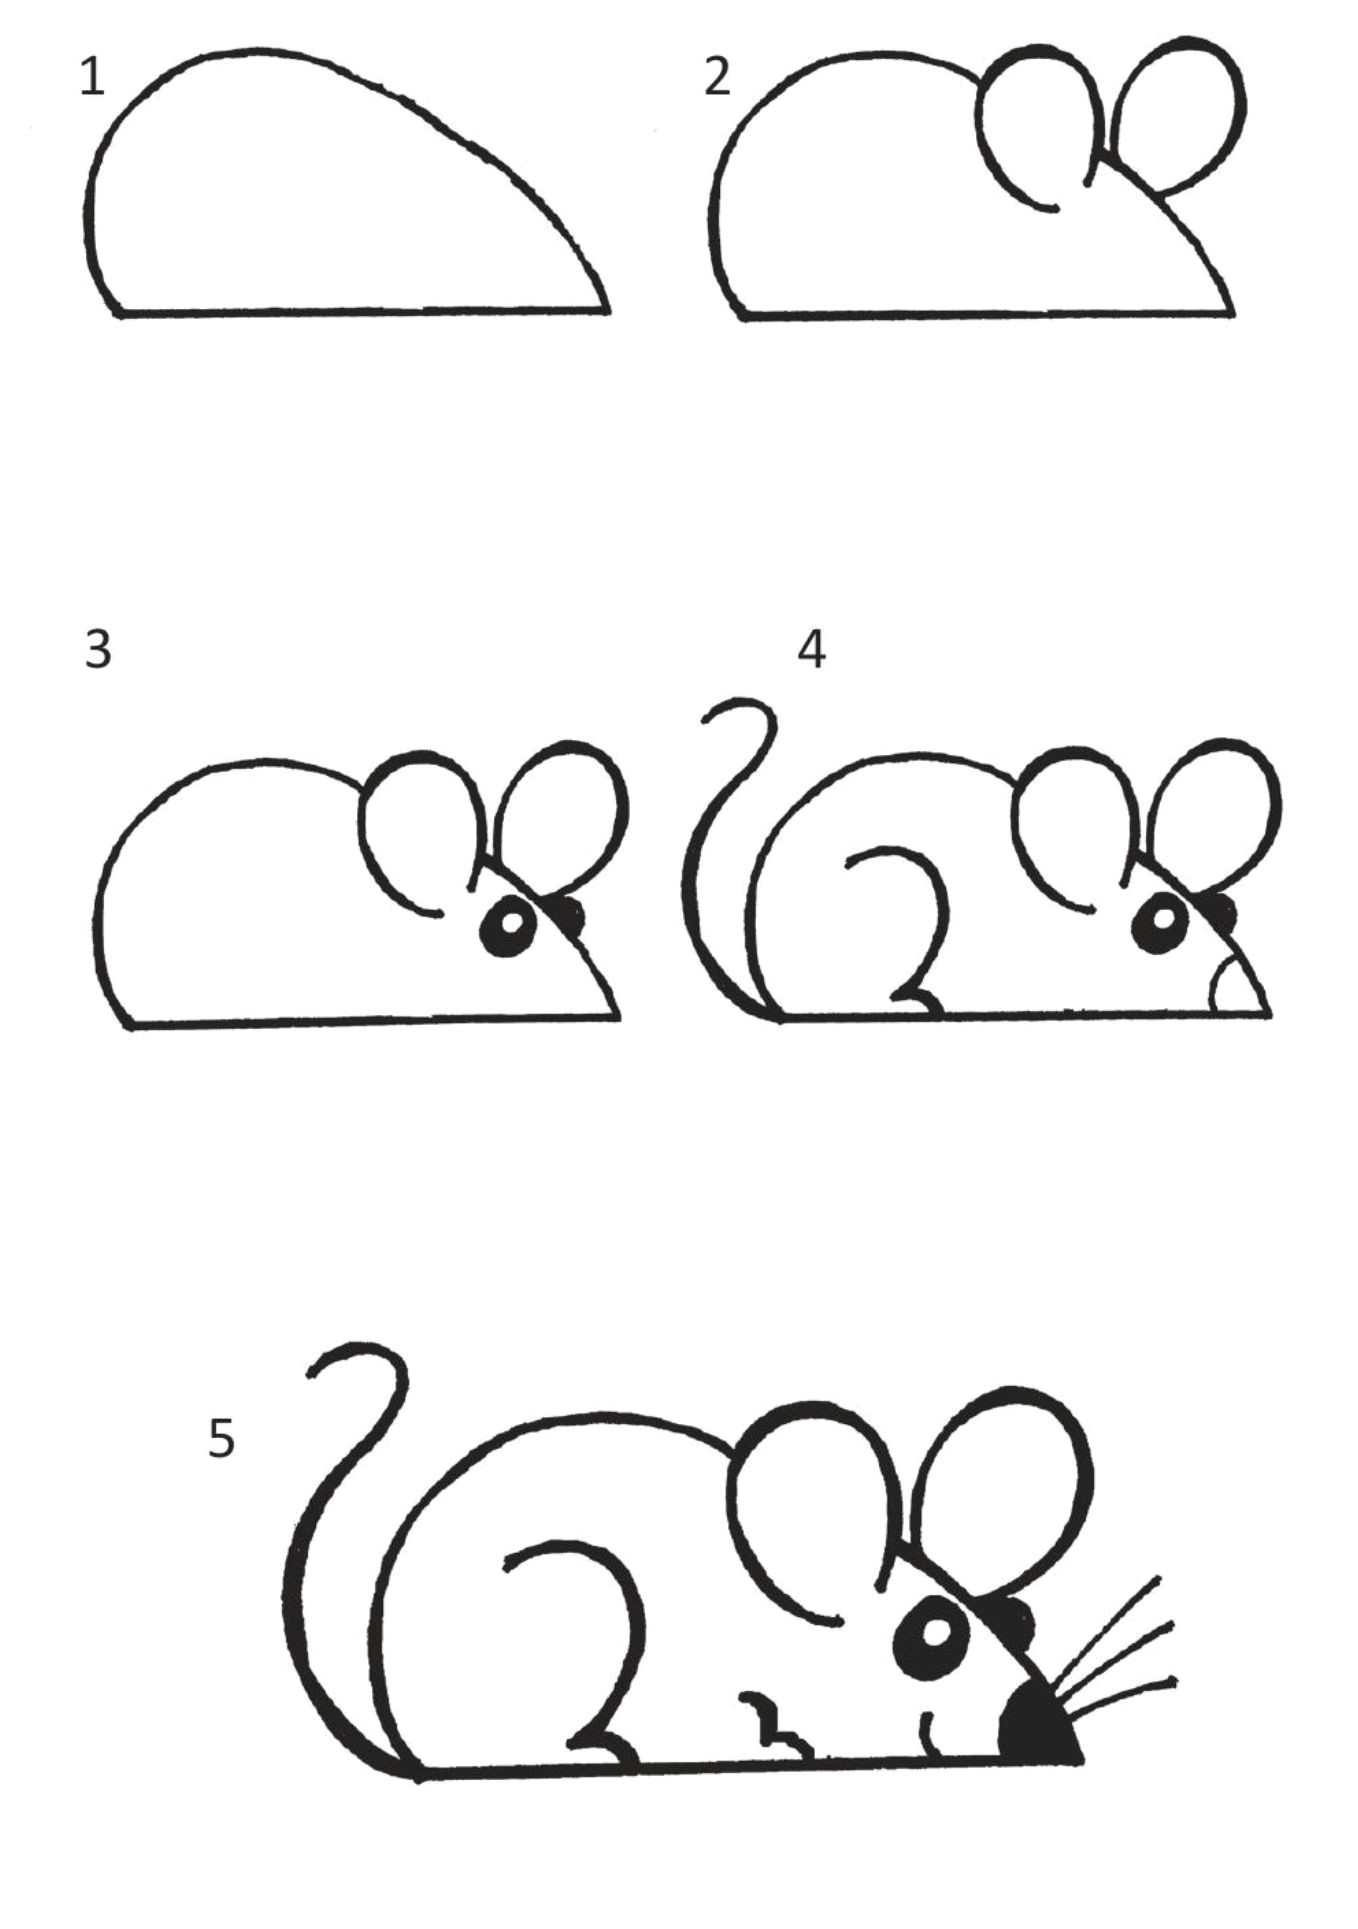 Ideas to Draw Cartoon Quick Mouse Doodle for when You Want A Doodle that Looks